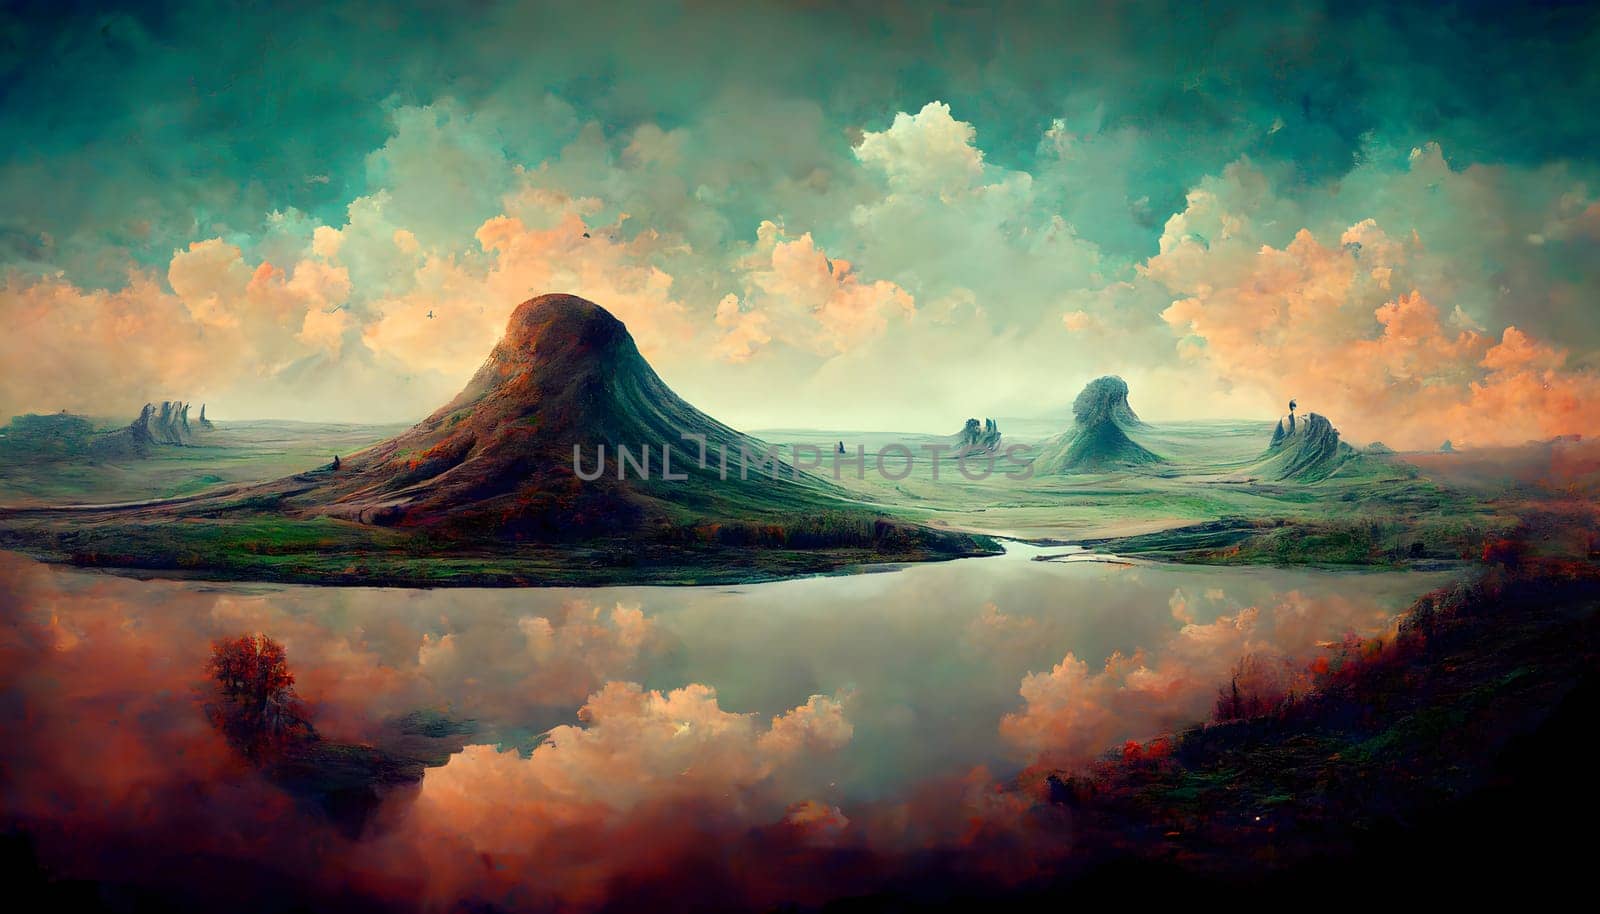 dreamy alien landscape with butte mountains and strange clouds, neural network generated art. Digitally generated image. Not based on any actual scene or pattern.